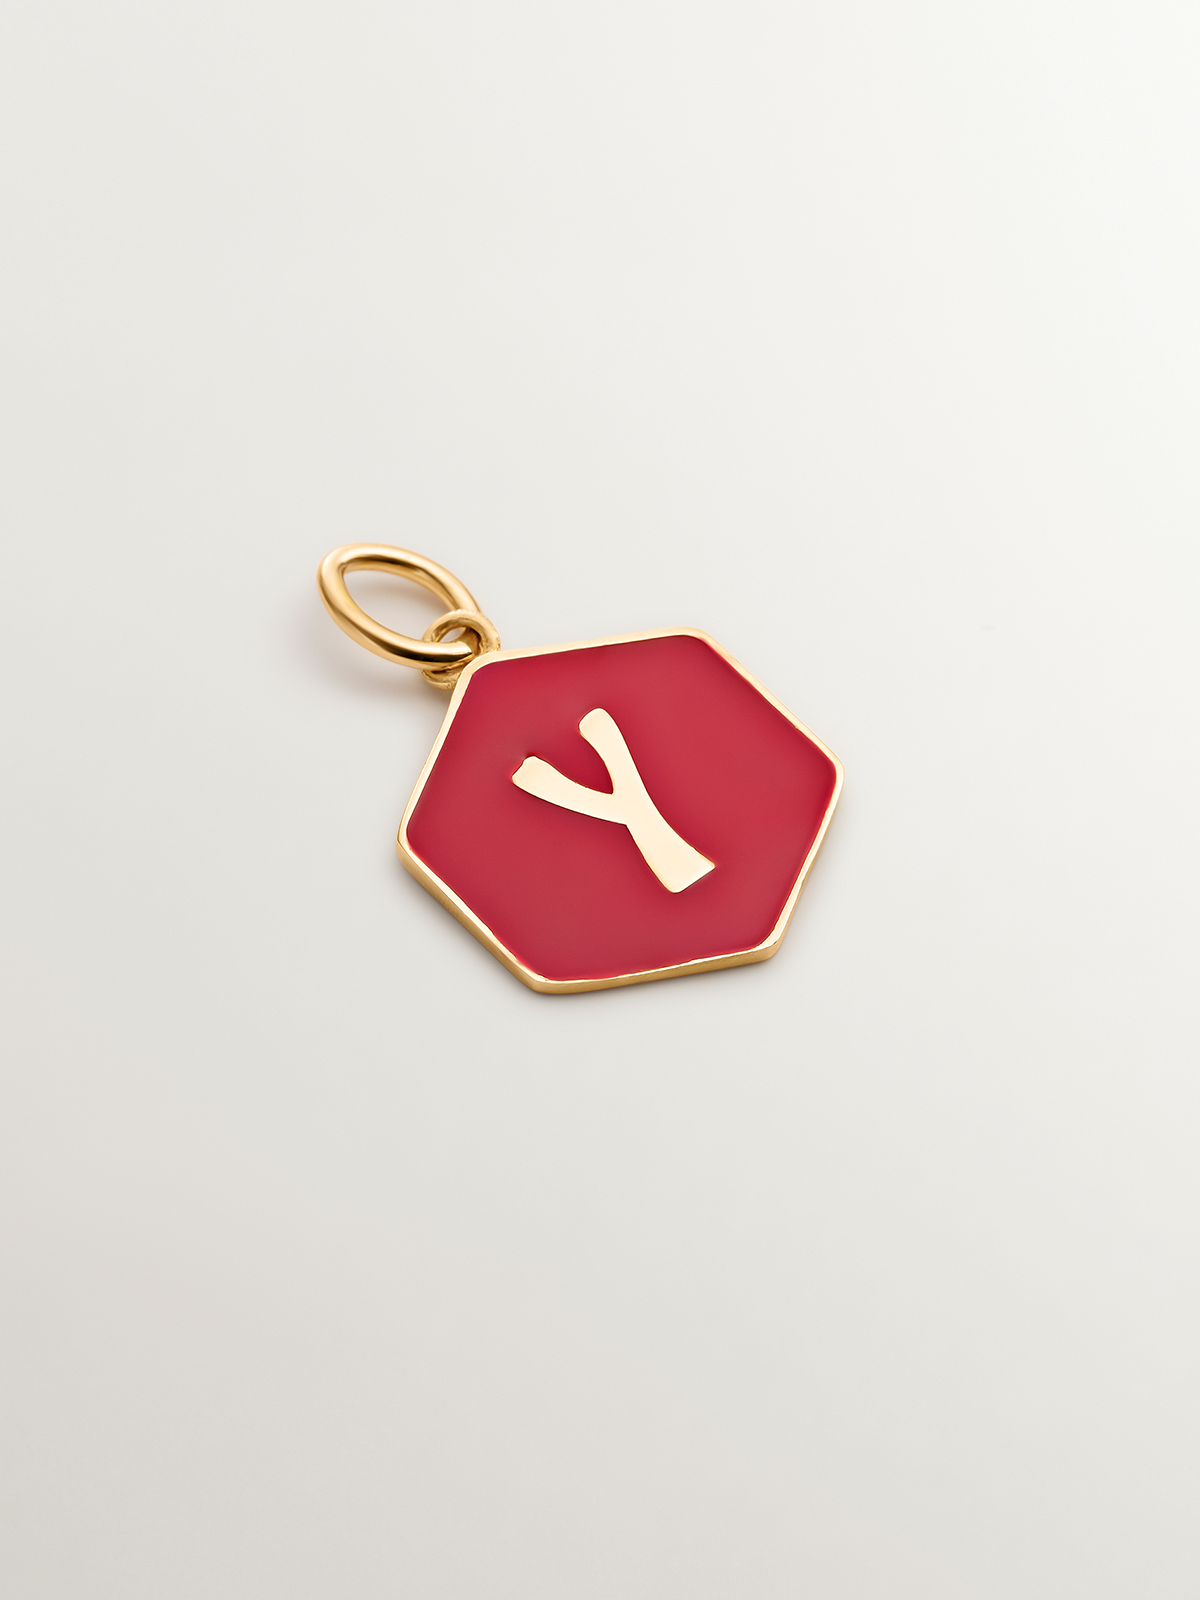 18K yellow gold plated 925 sterling silver charm with Y initial and red enamel with hexagonal shape